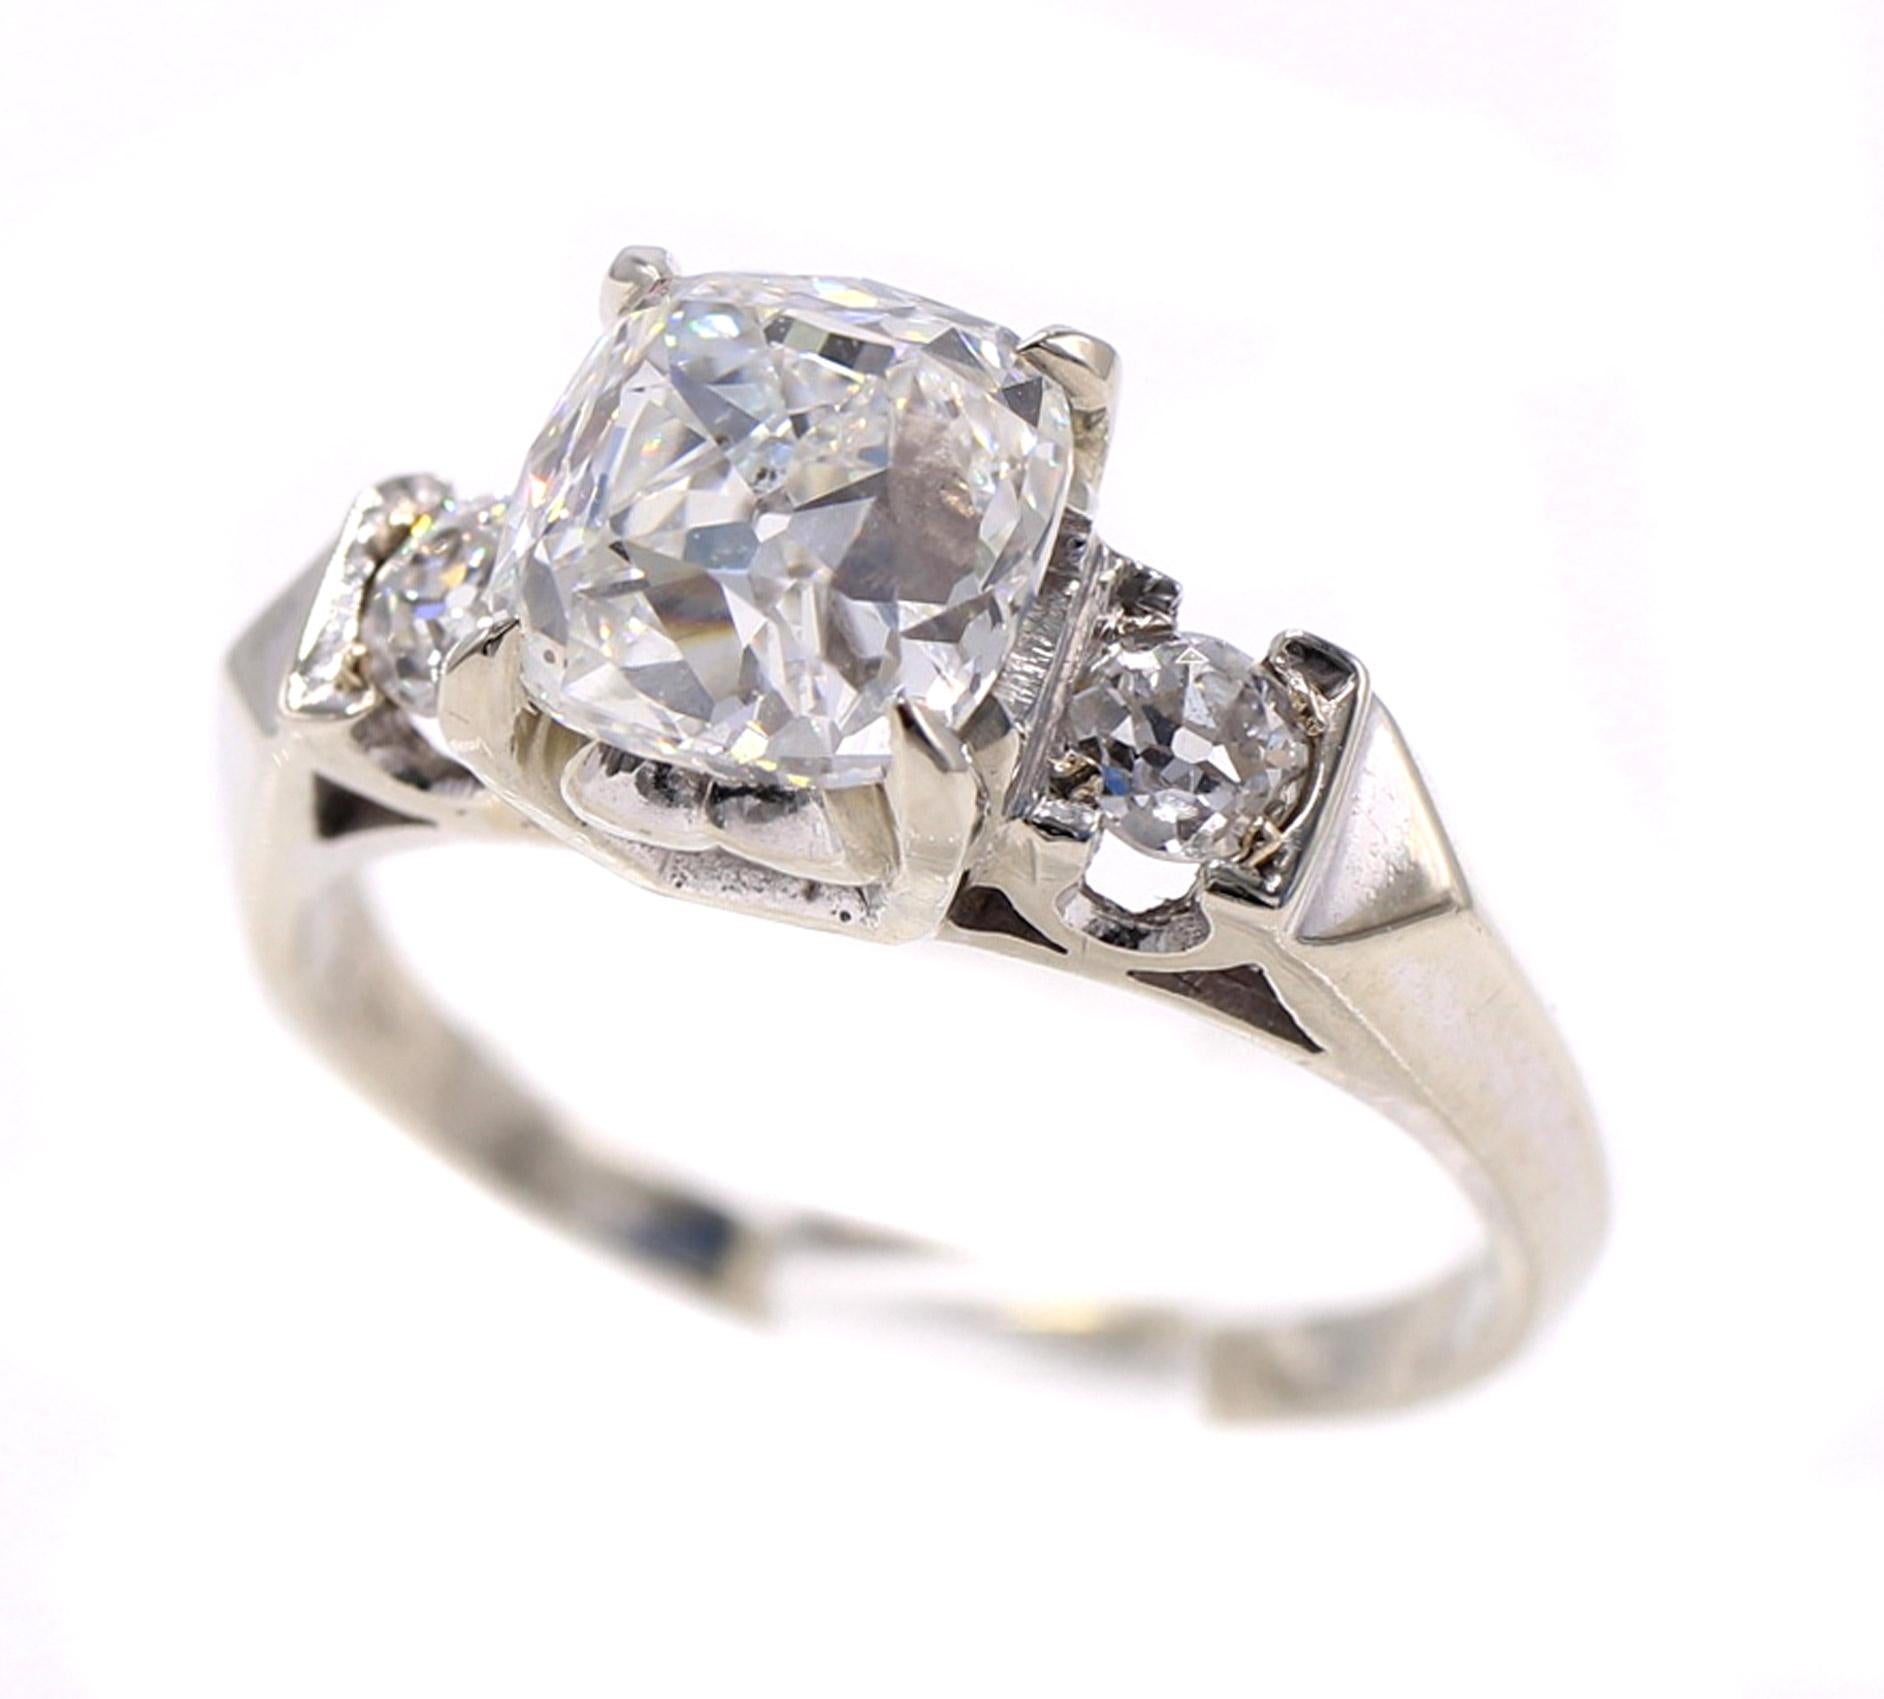 2.15 Carat Old Mine Brilliant GIA Certified Gold Diamond Ring For Sale 2